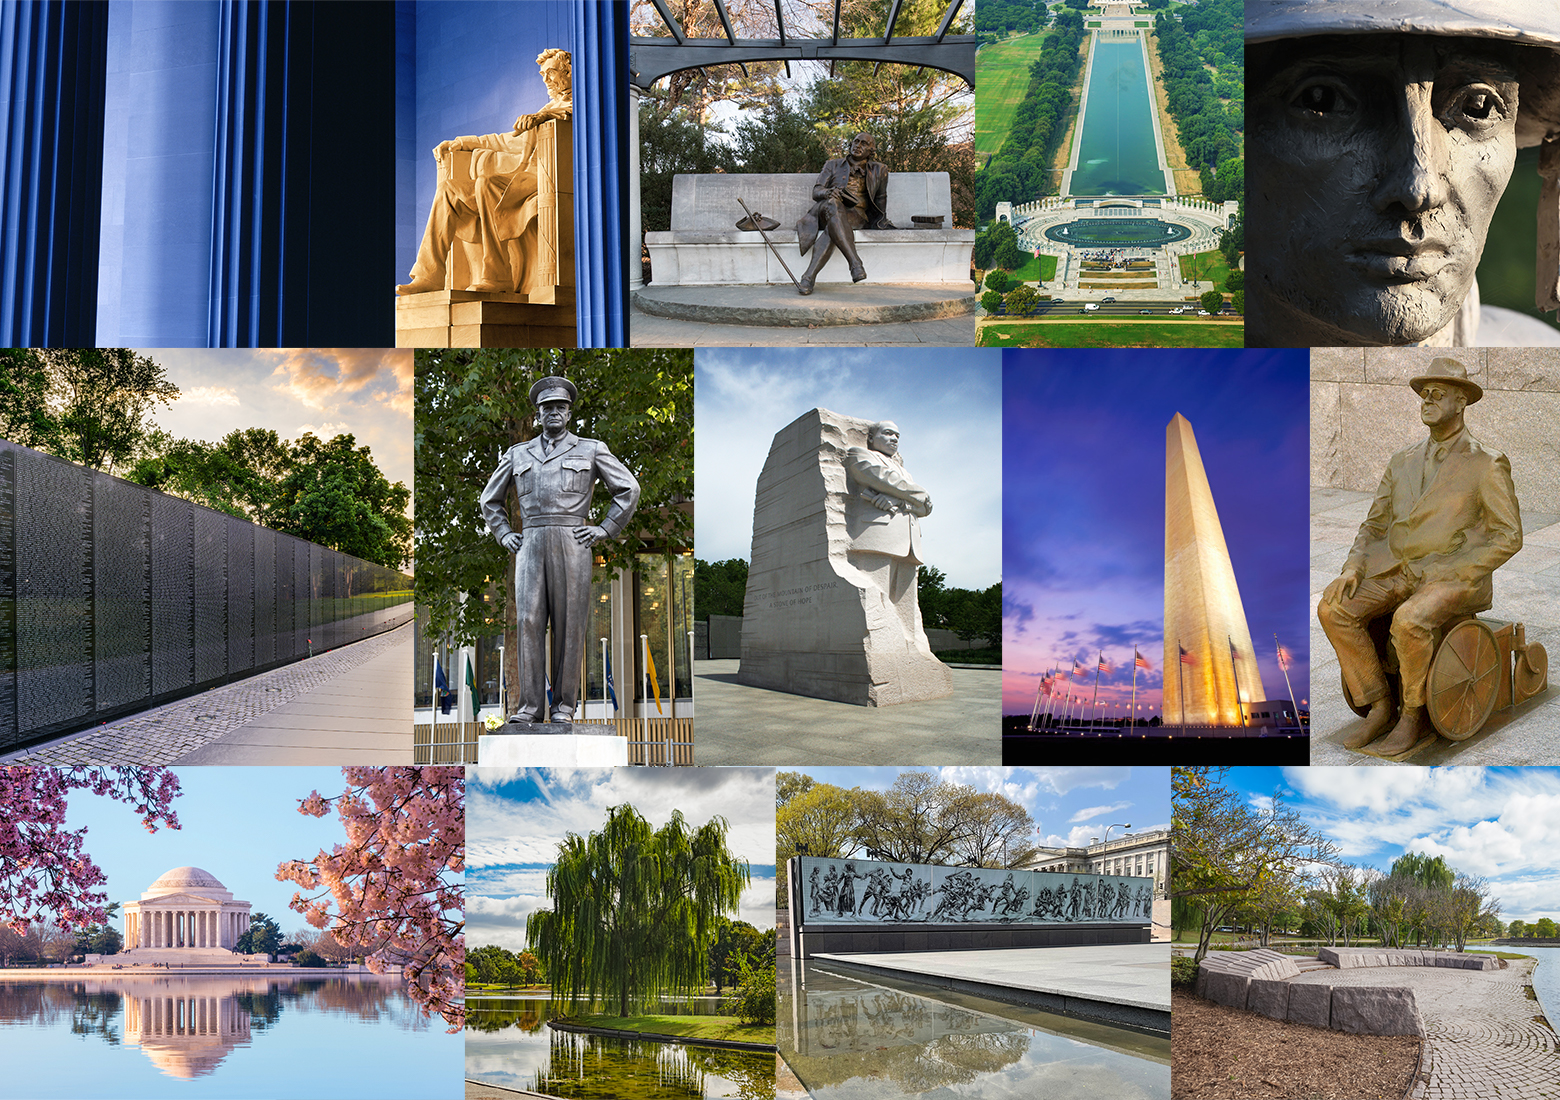 Collage of images of the Monuments from the National Mall.